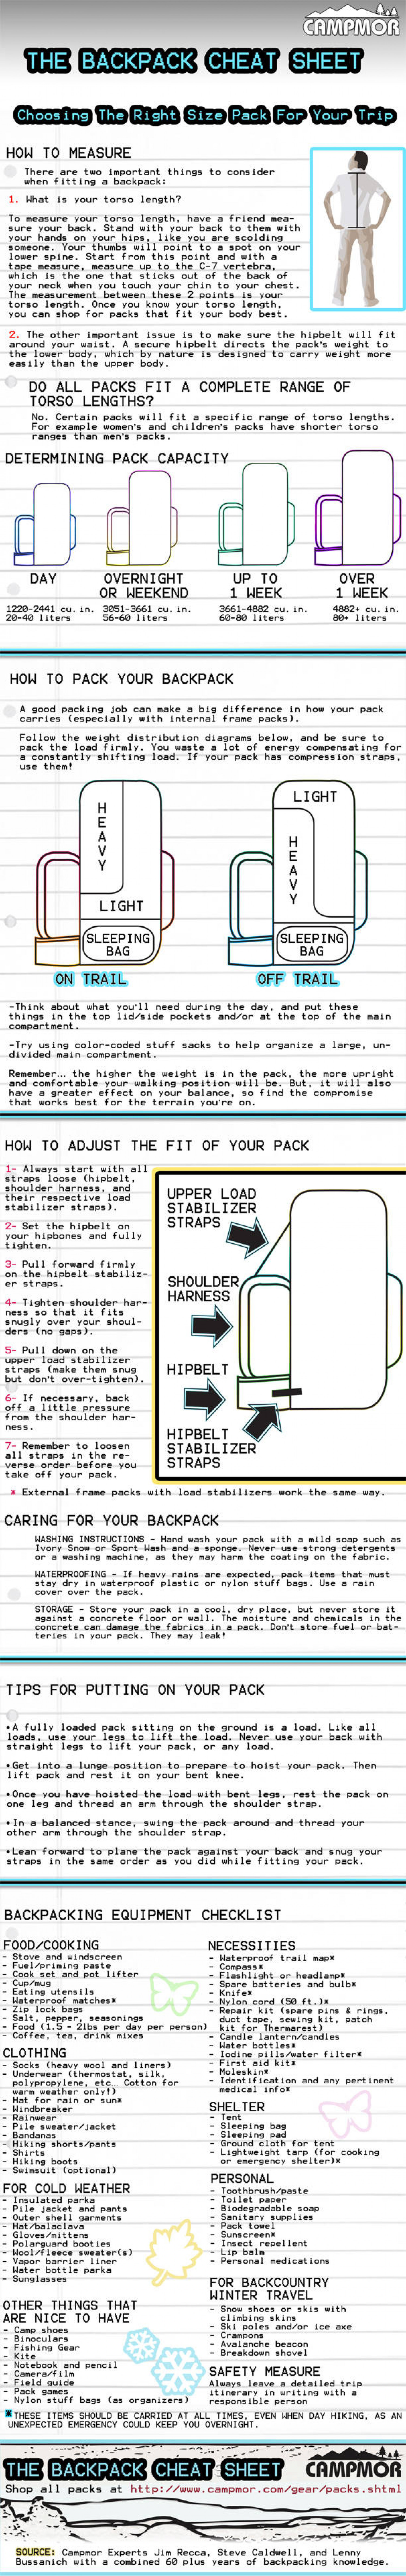 Backpack Cheat Sheet Infographic